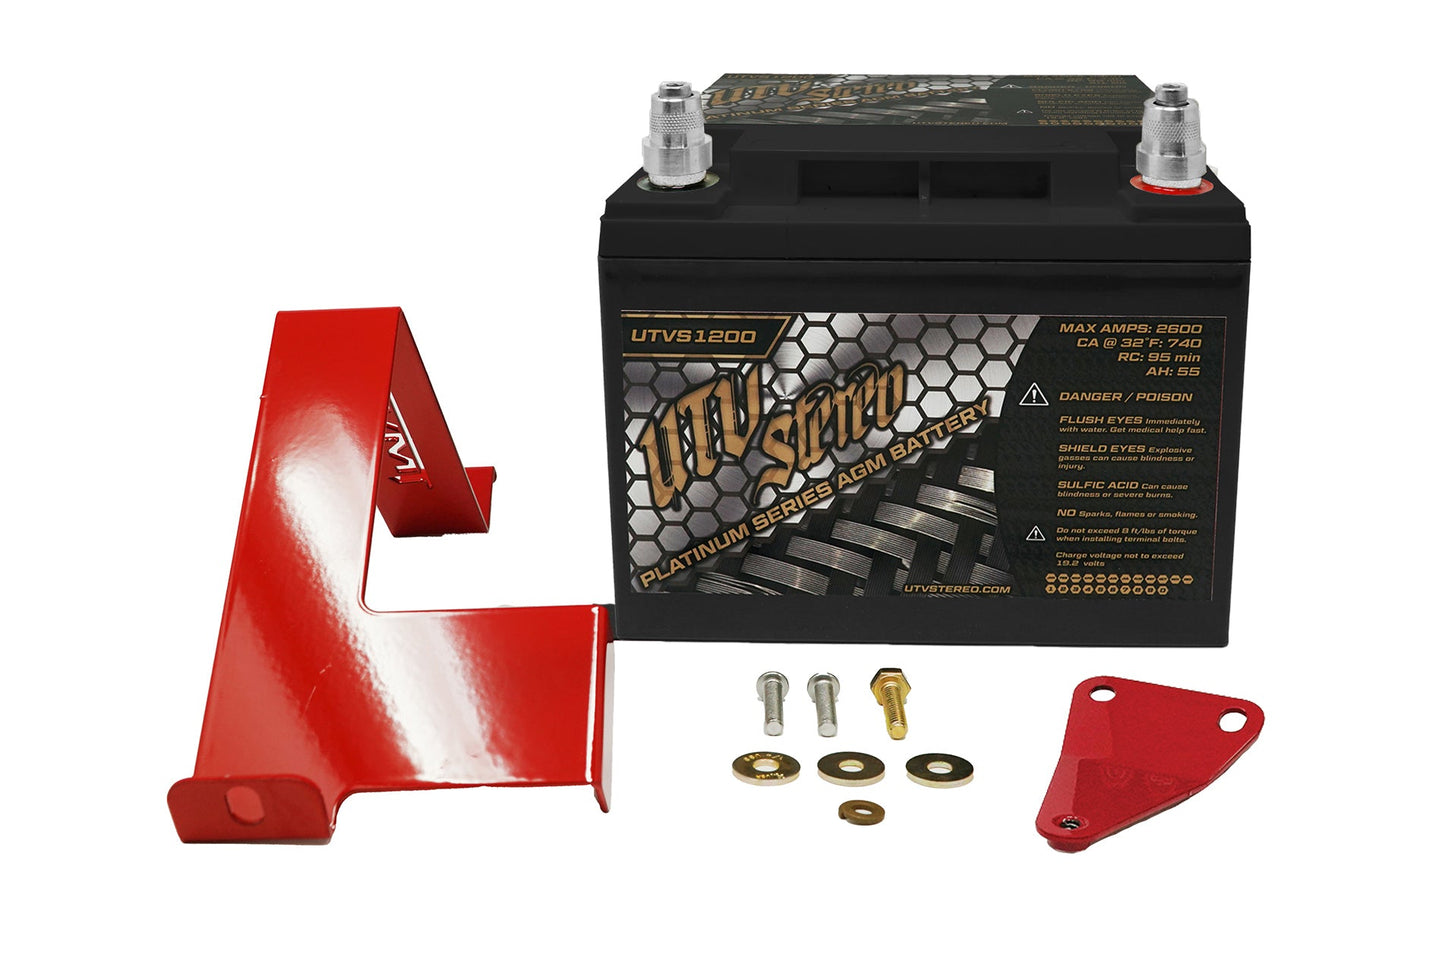 Can-Am X3 BIG Battery Kit